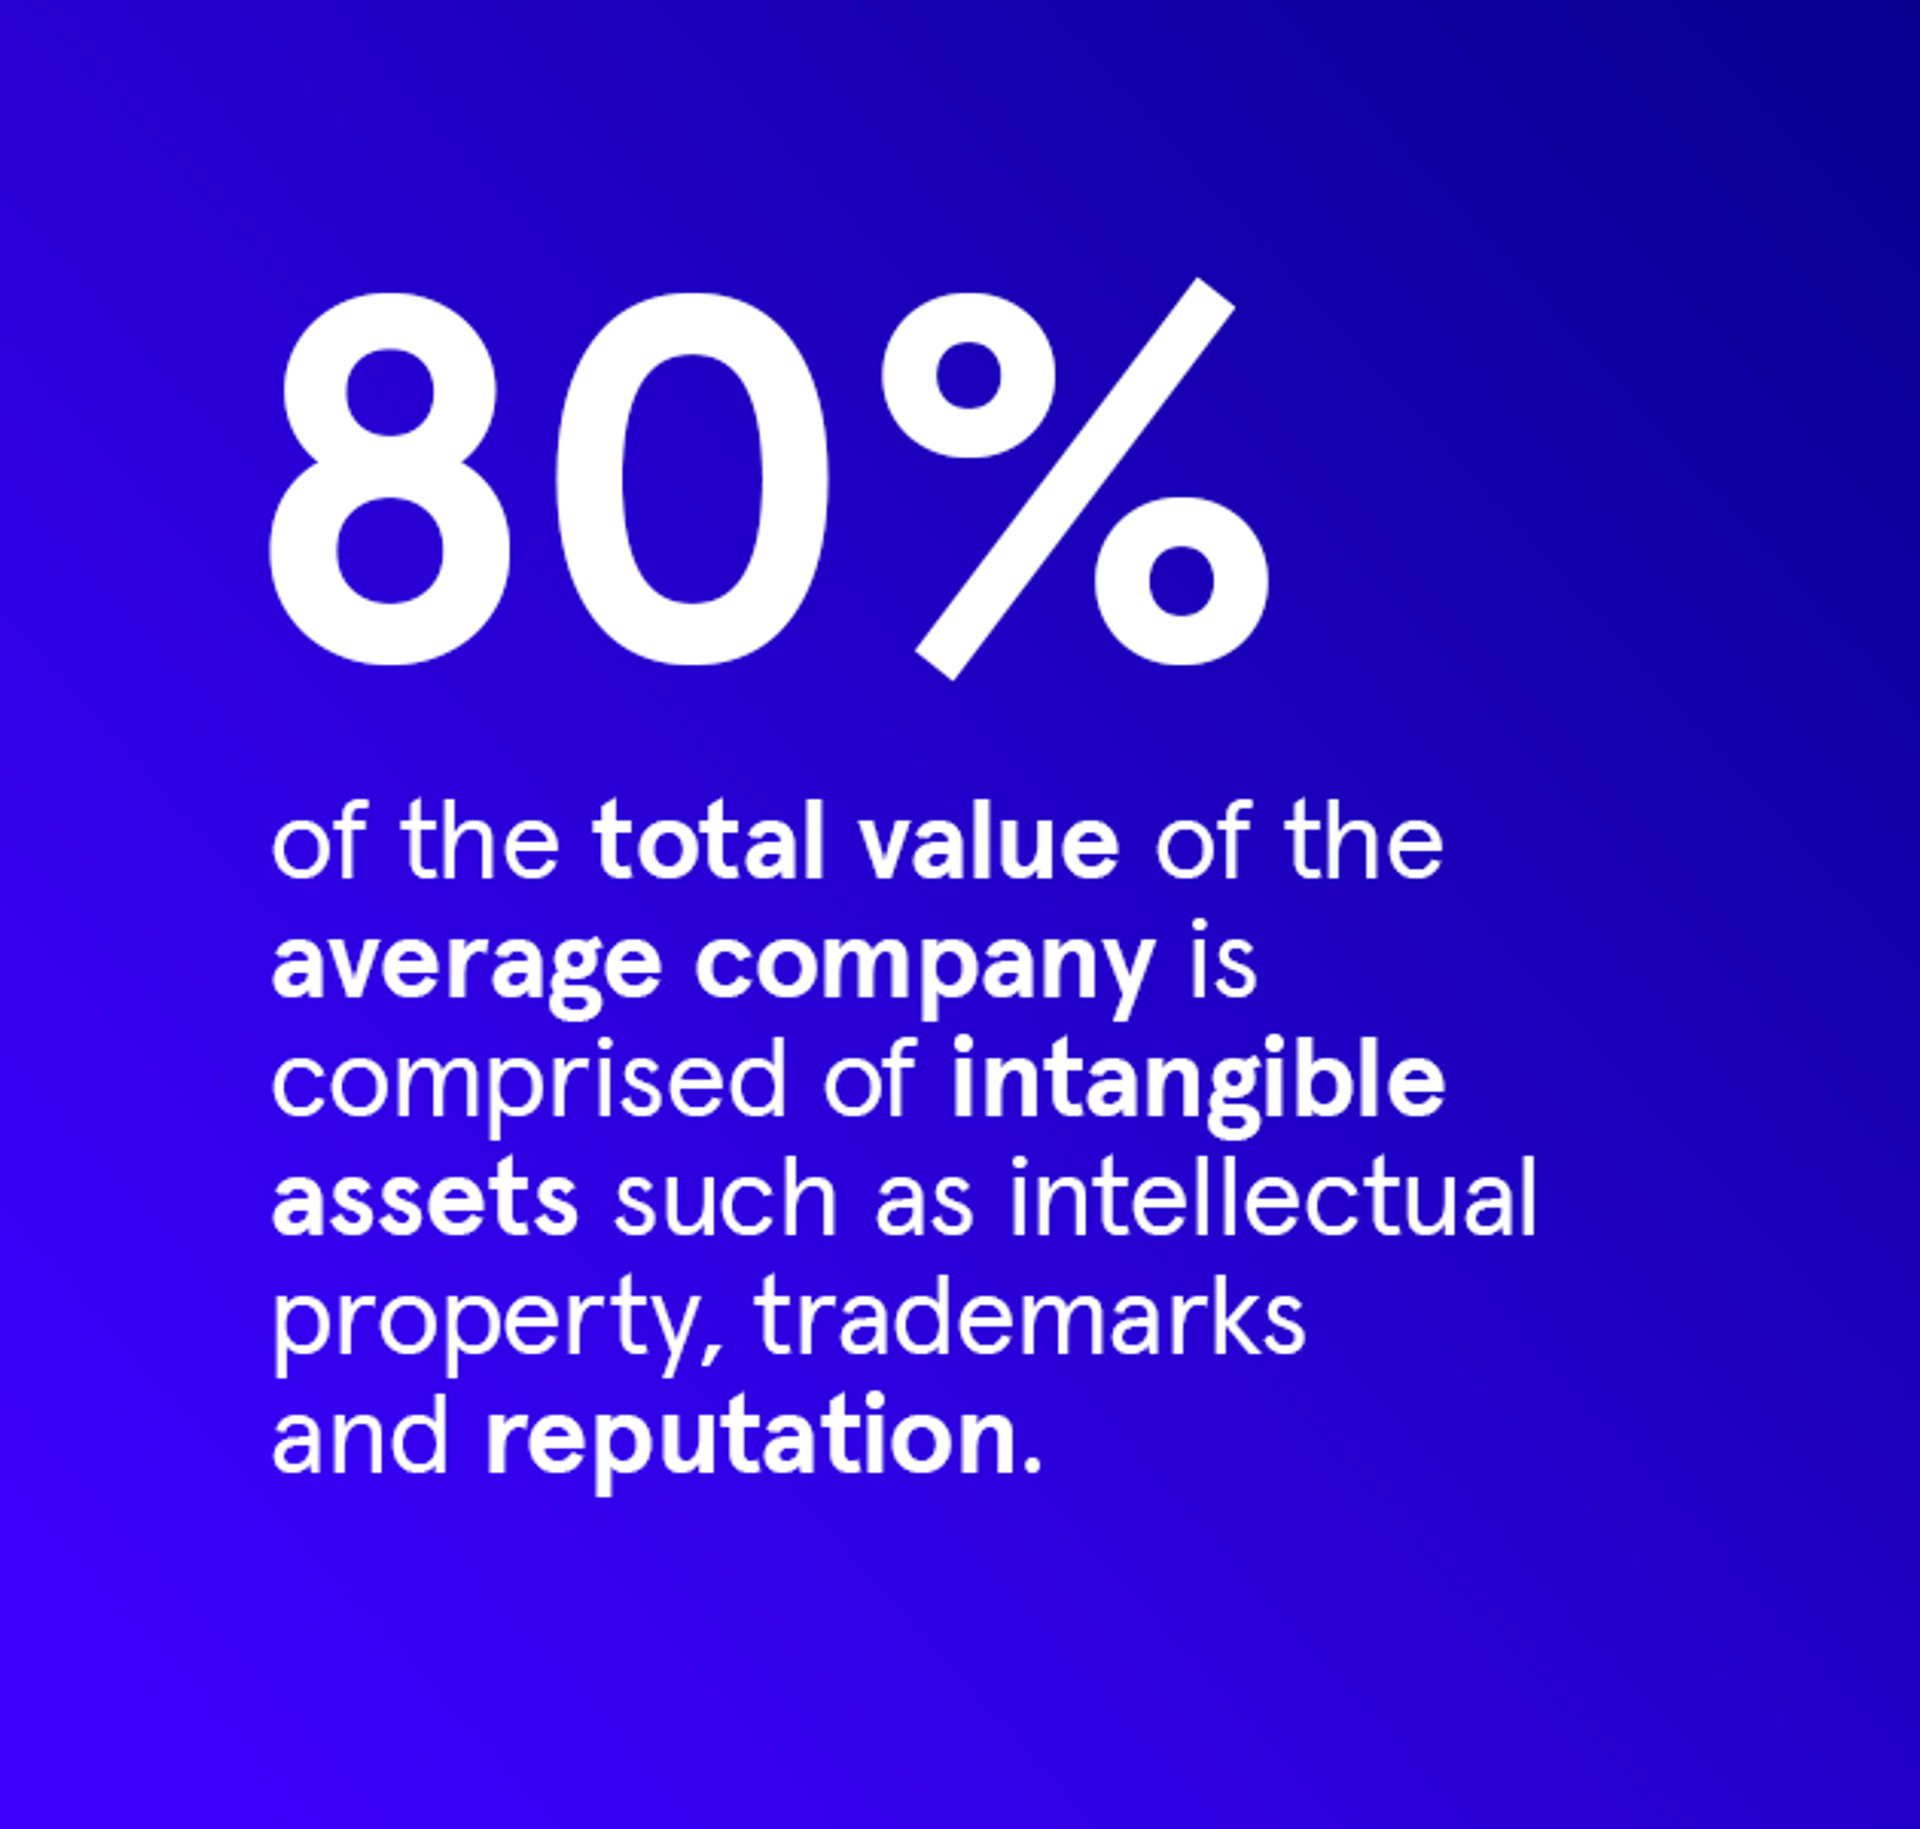 Infographic stating: 80% of the total value of the average company is comprised of intangible assets such as intellectual property, trademarks and reputation